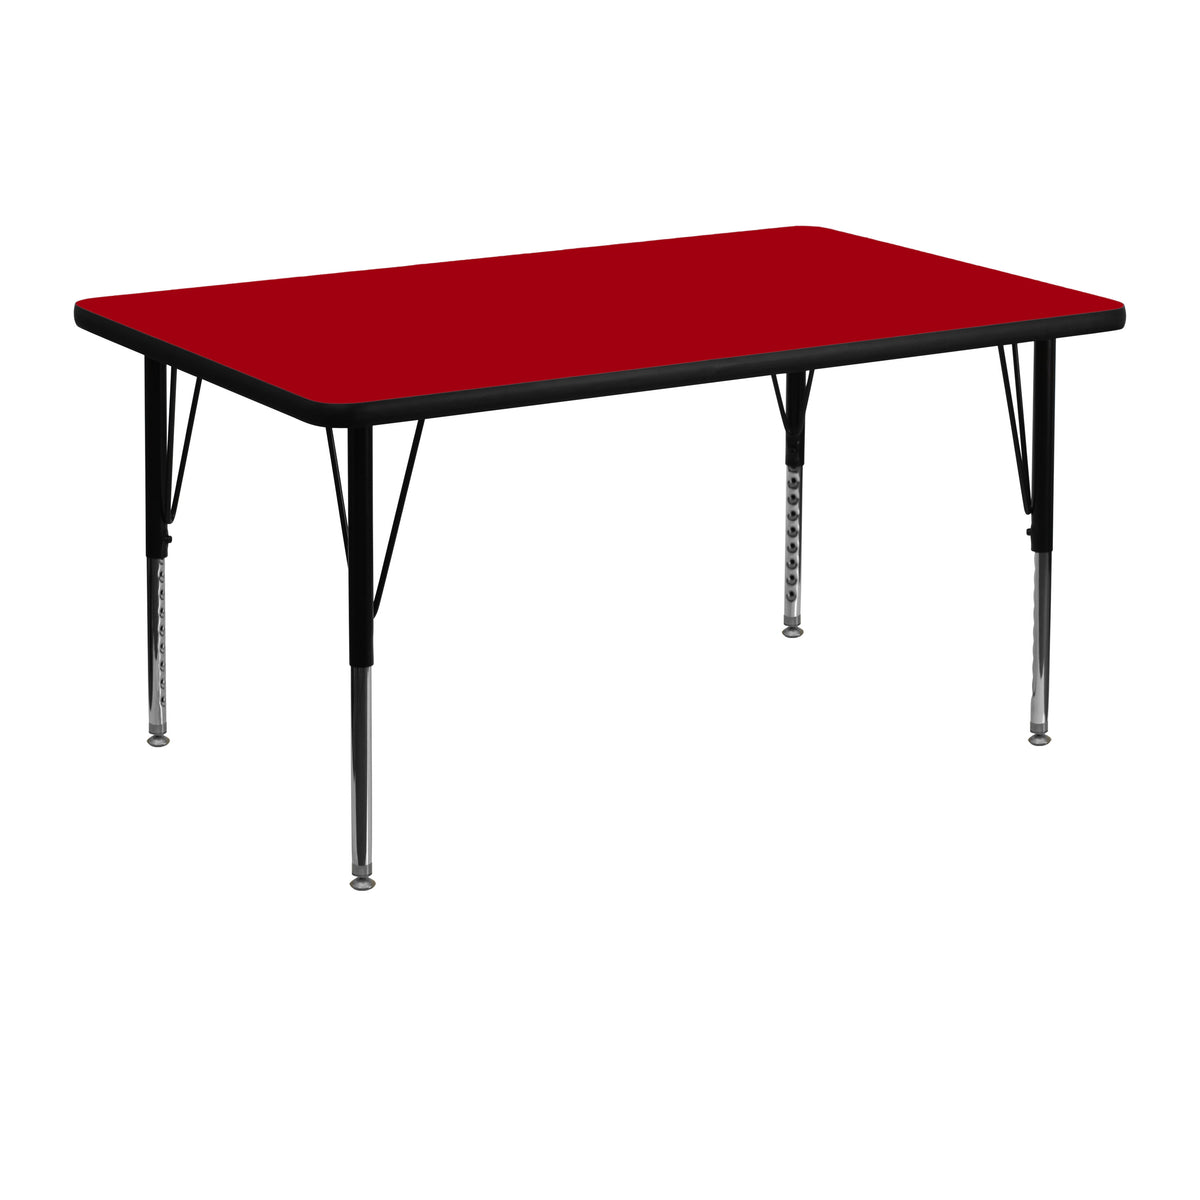 Red |#| 30inchW x 48inchL Rectangular Red Thermal Laminate Adjustable Activity Table